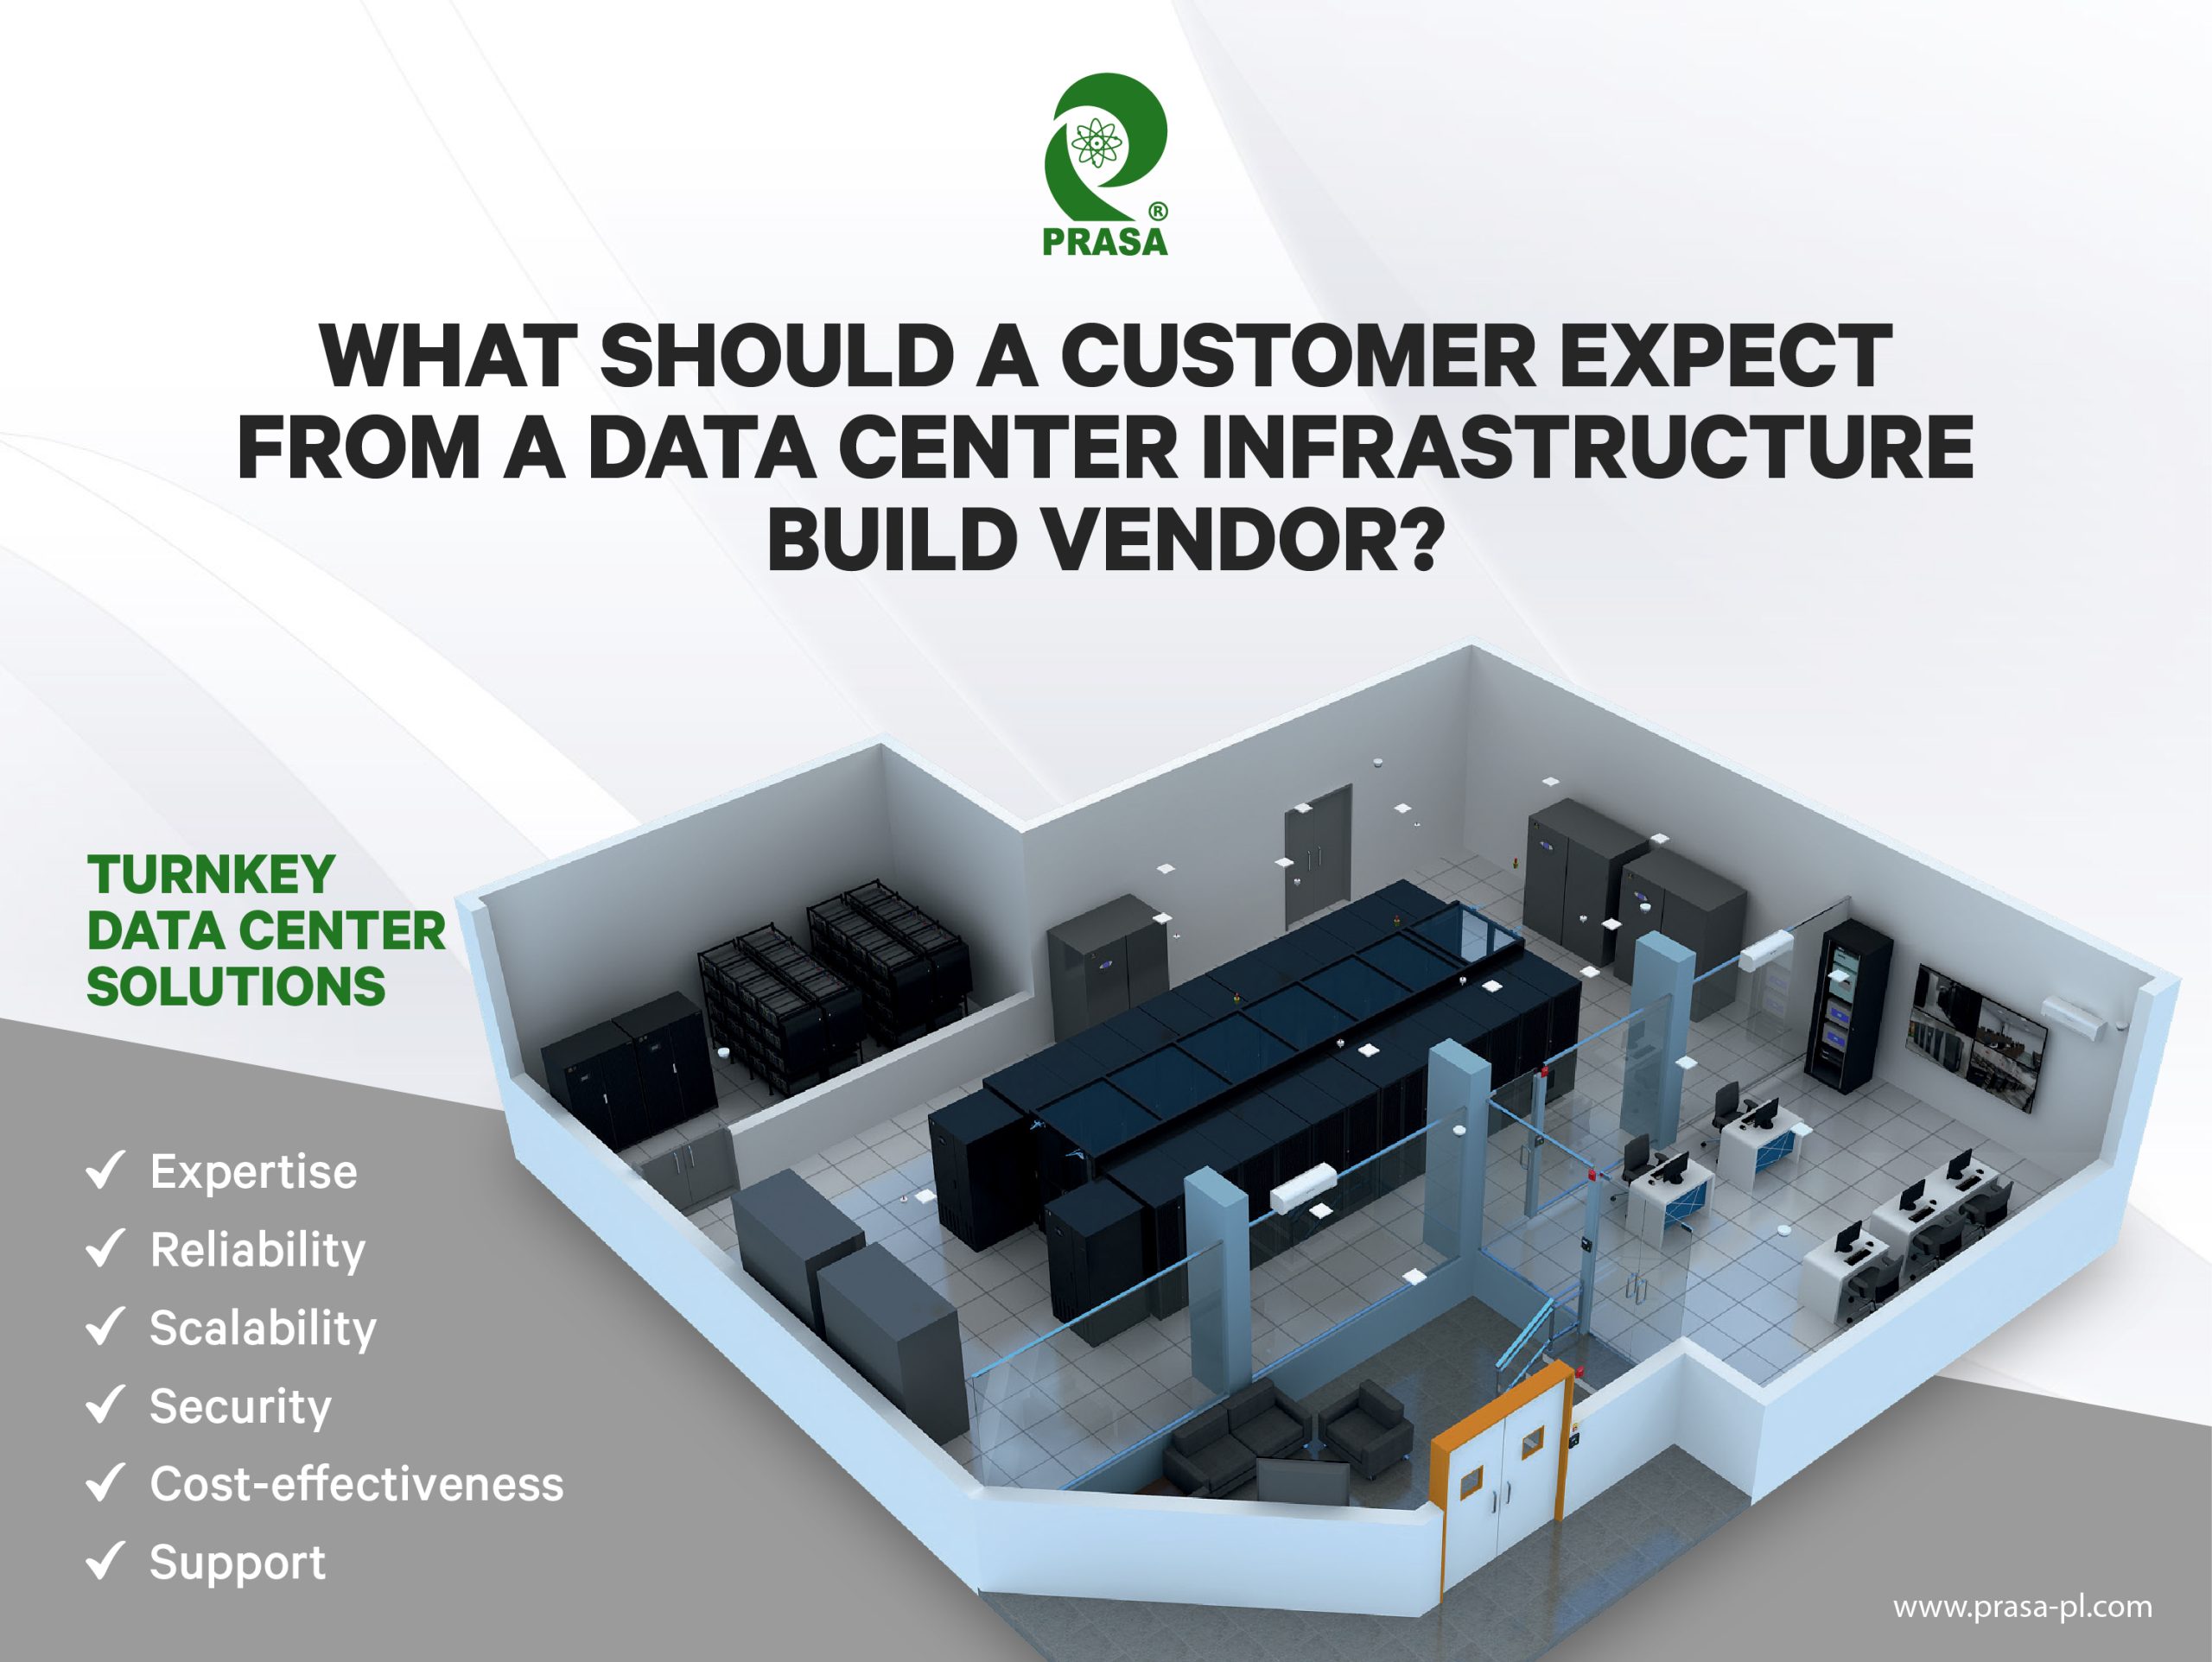 What should a Customer Expect from a Data Center Infrastructure Build Vendor?